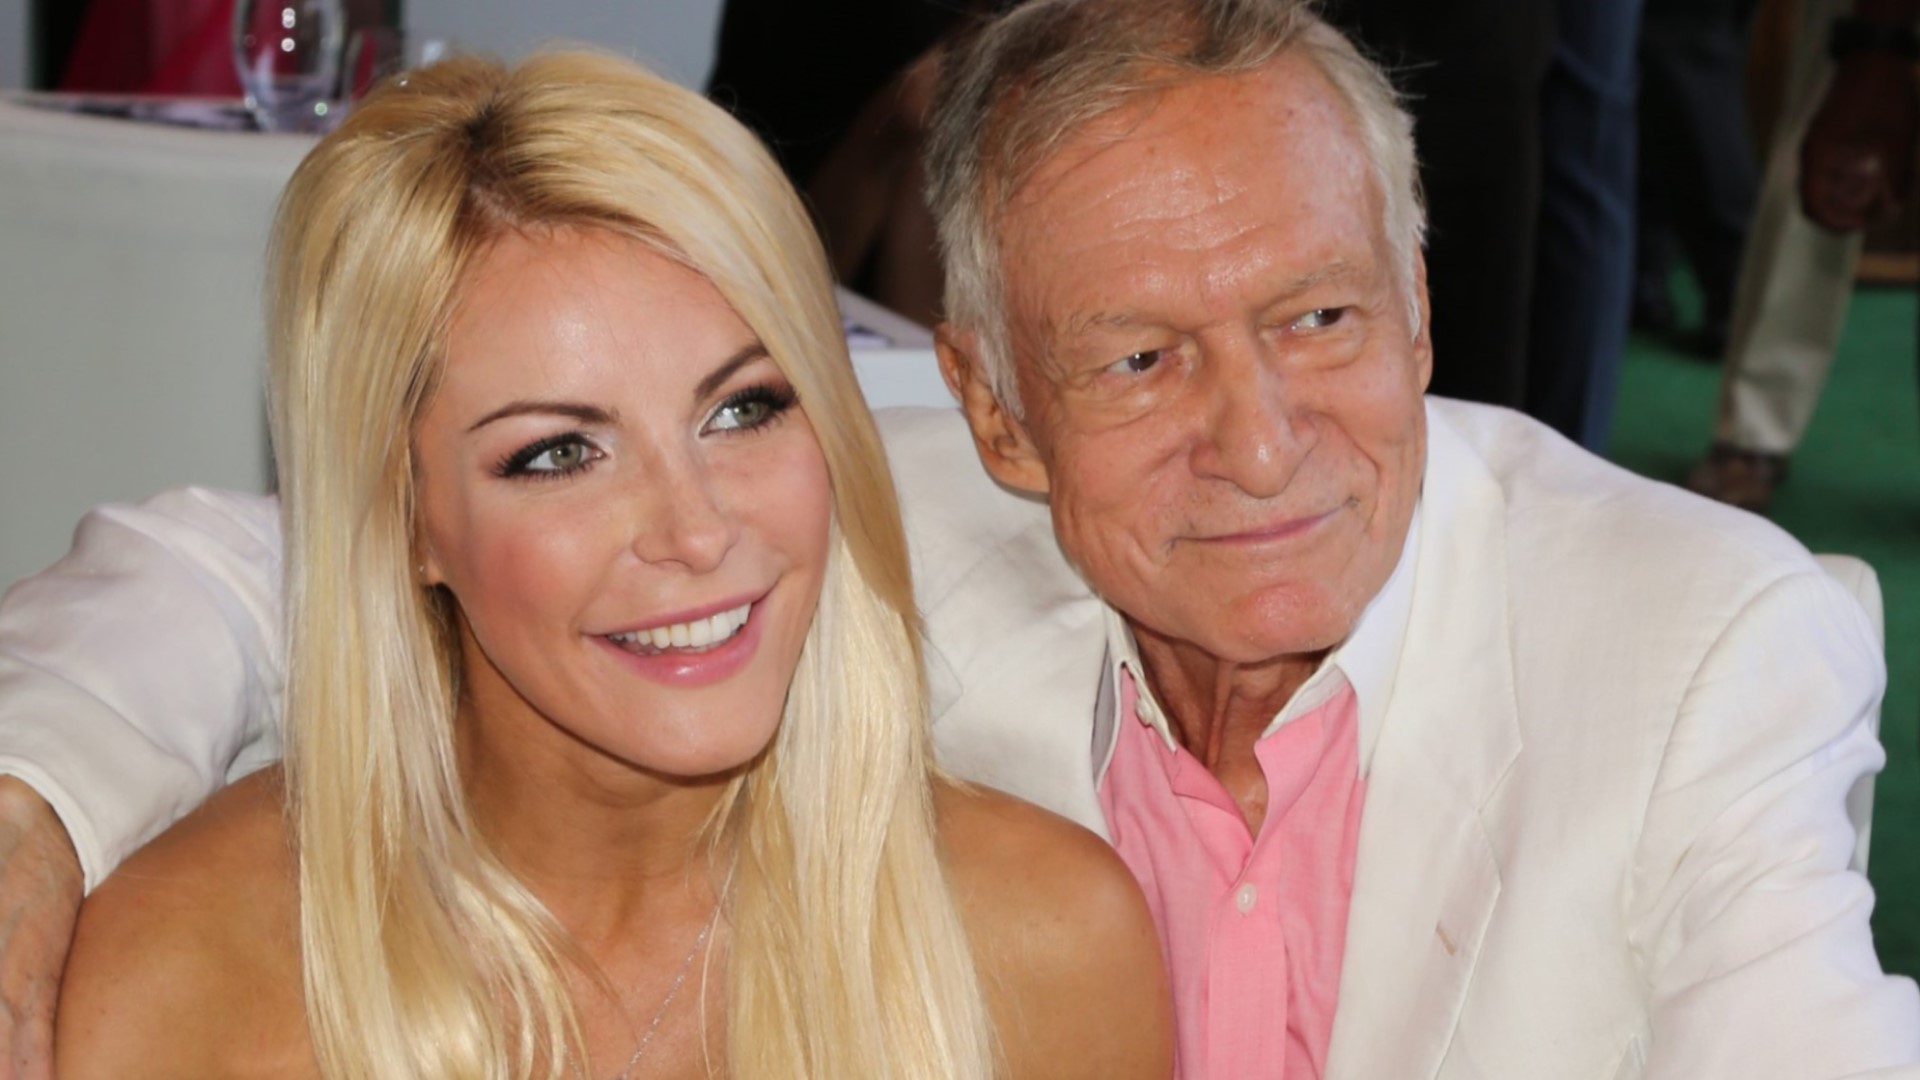 Shocking: A day in the life of a bunny in Hugh Hefner's mansion